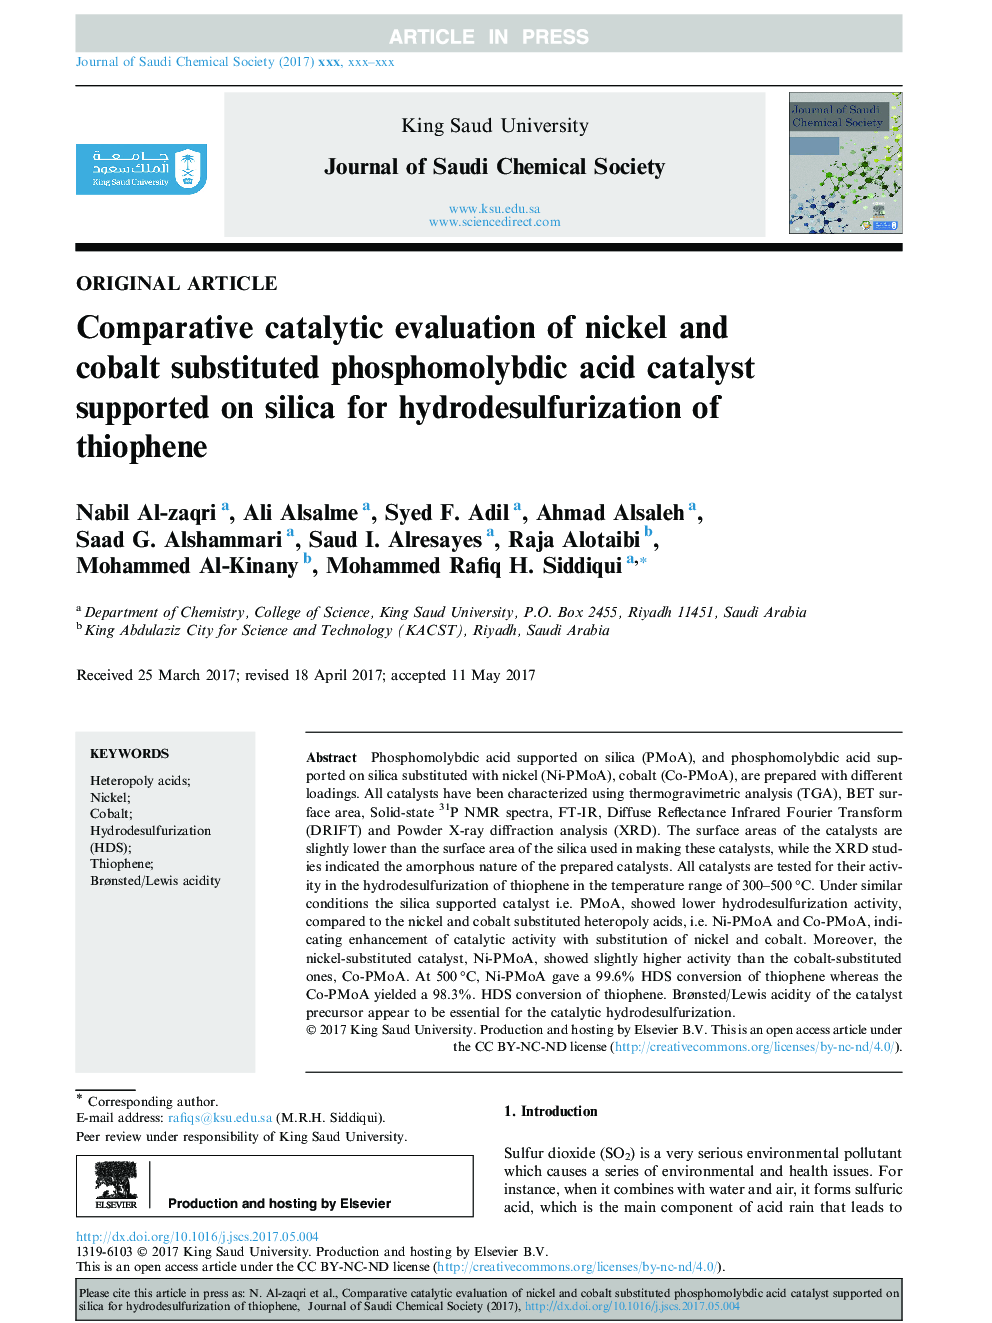 Comparative catalytic evaluation of nickel and cobalt substituted phosphomolybdic acid catalyst supported on silica for hydrodesulfurization of thiophene